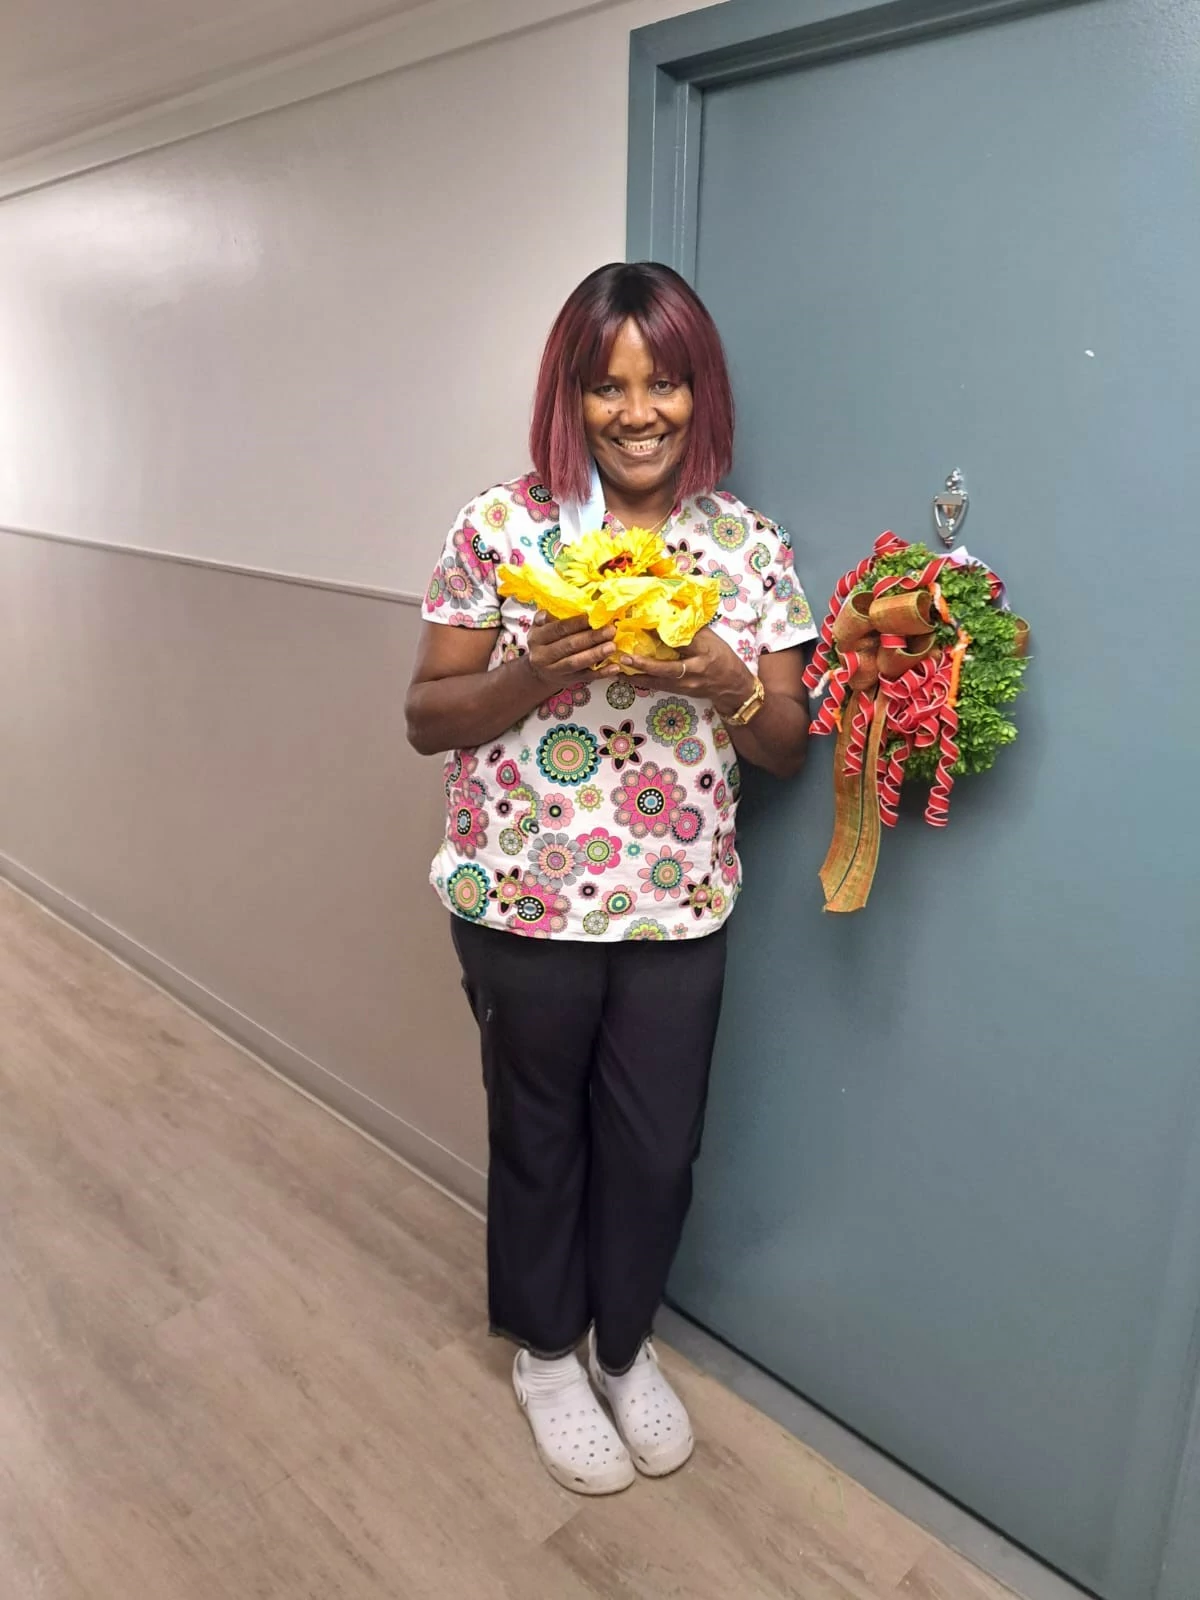 Caregiver got flowers from our client in appreciation. Thank you Shirley for caring and loving our clients! You make a big difference!